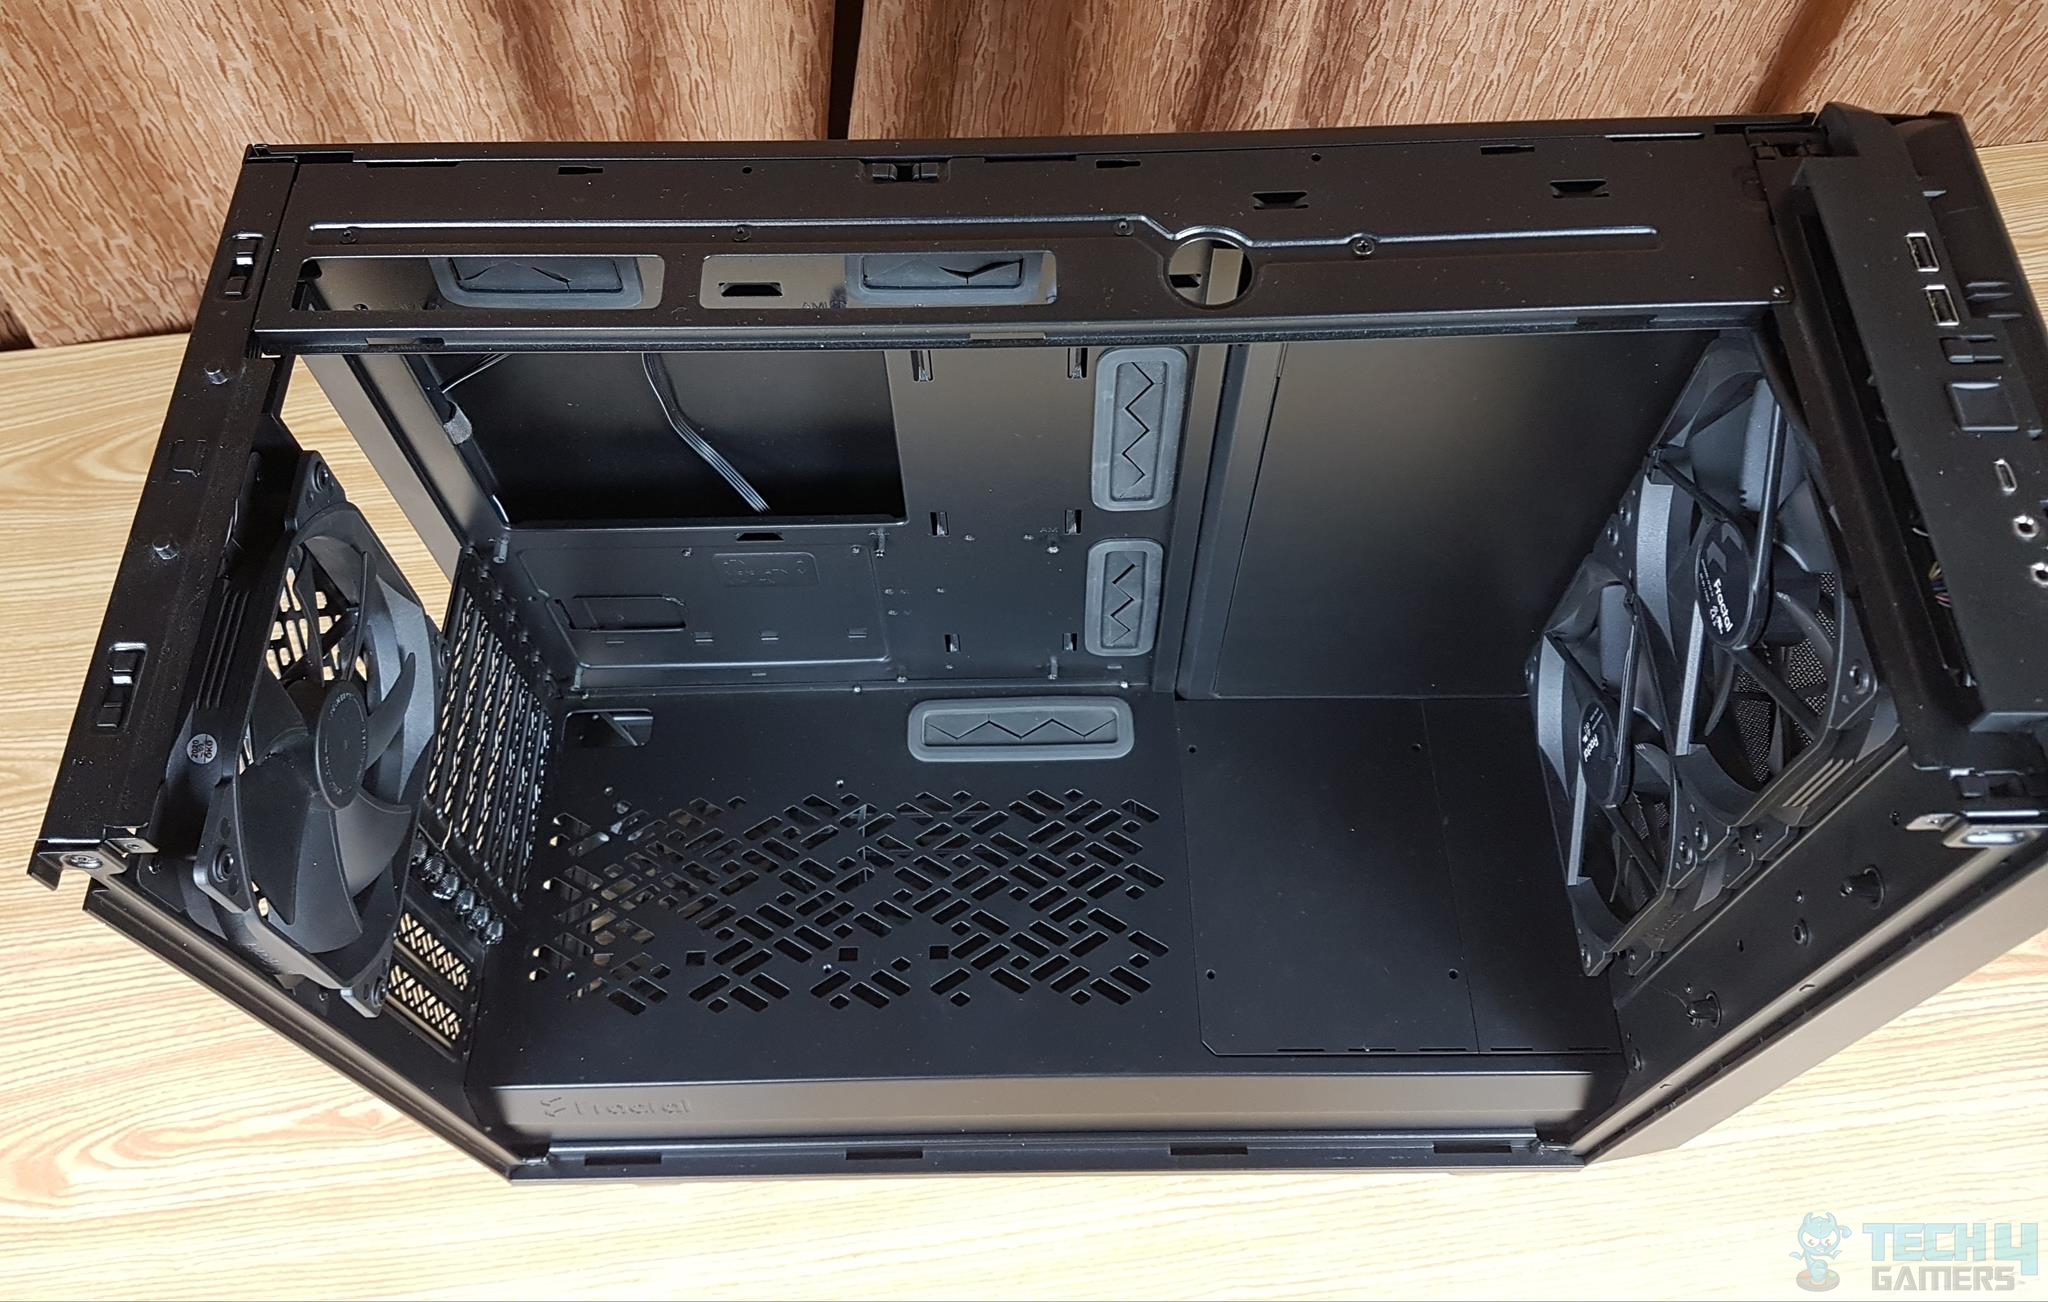 Fractal Design Meshify 2 — Another view of the case with the fan bracket removed